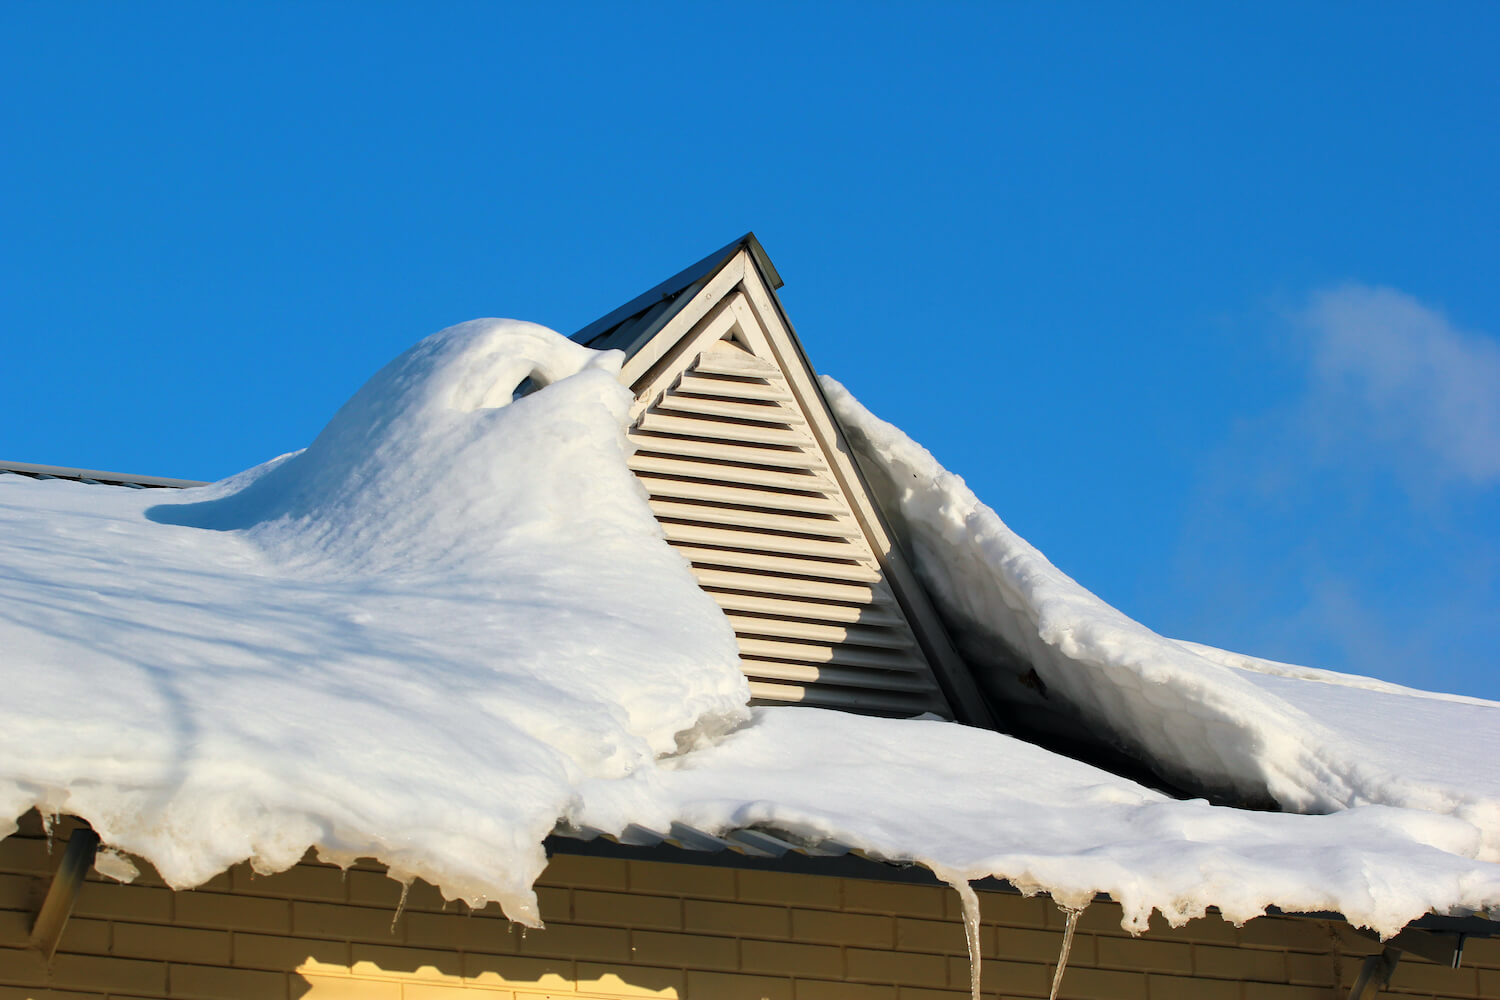 Snow covered roofs